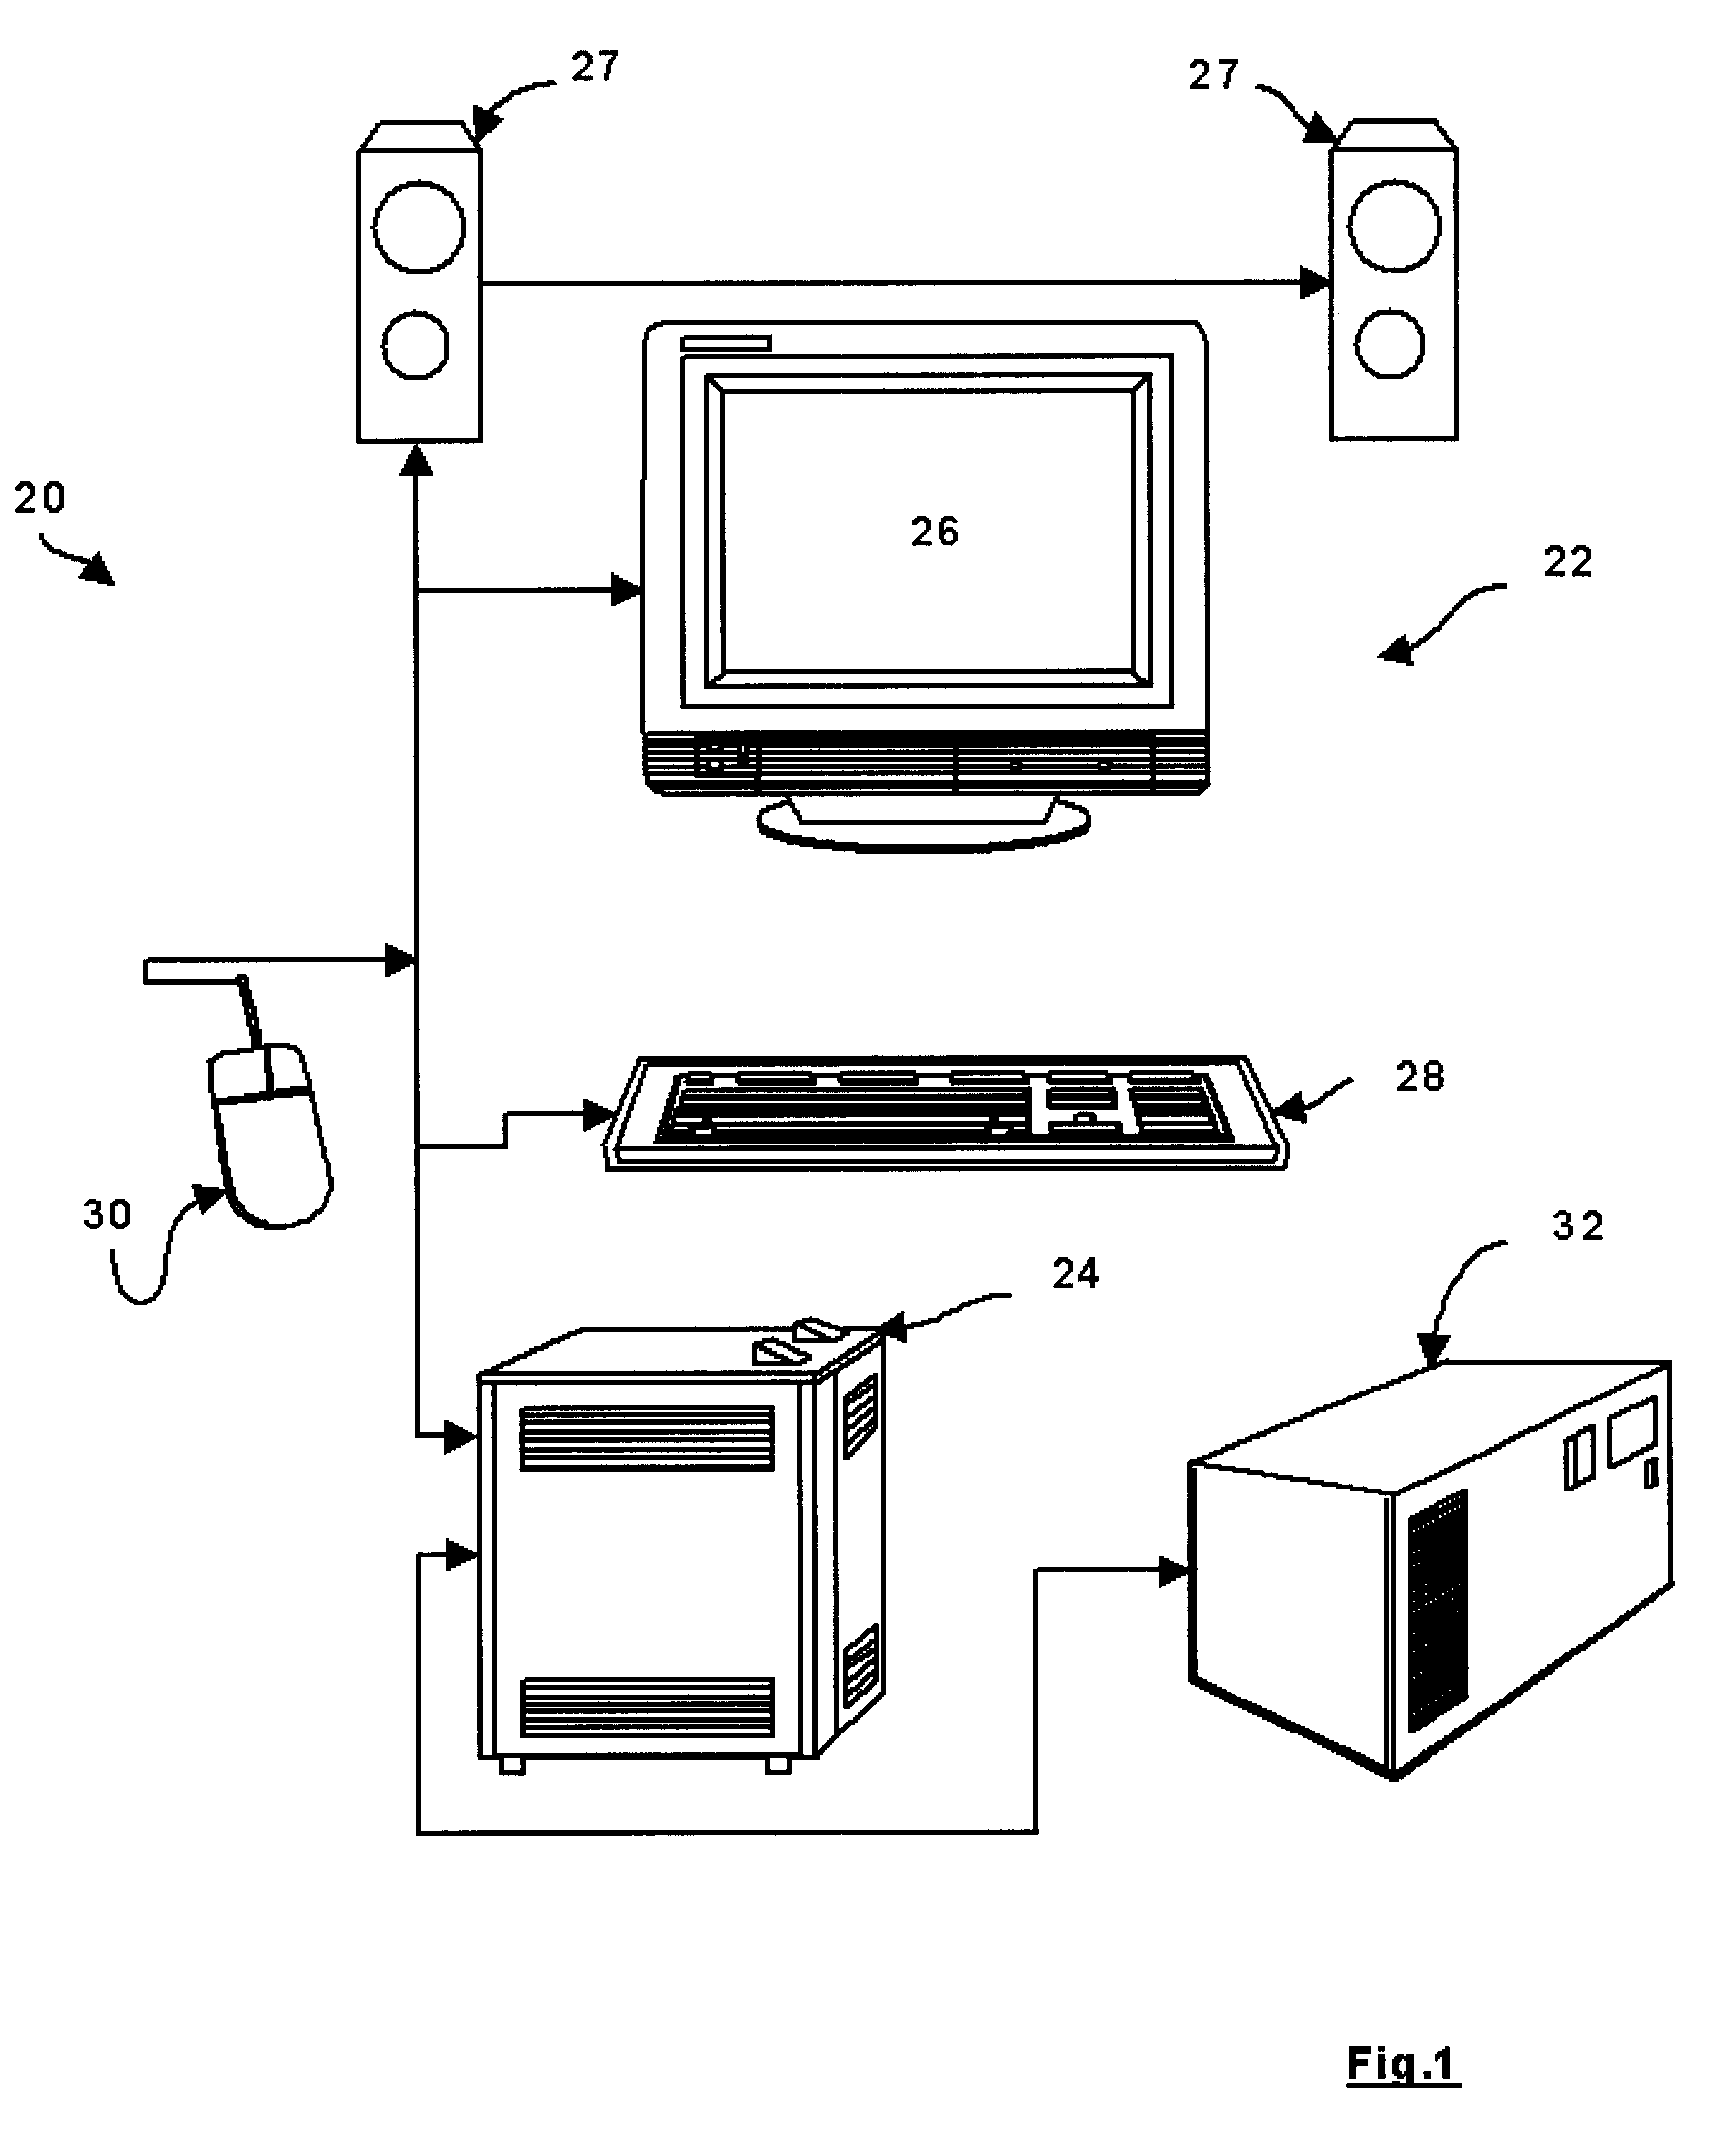 Method and system for designing a network